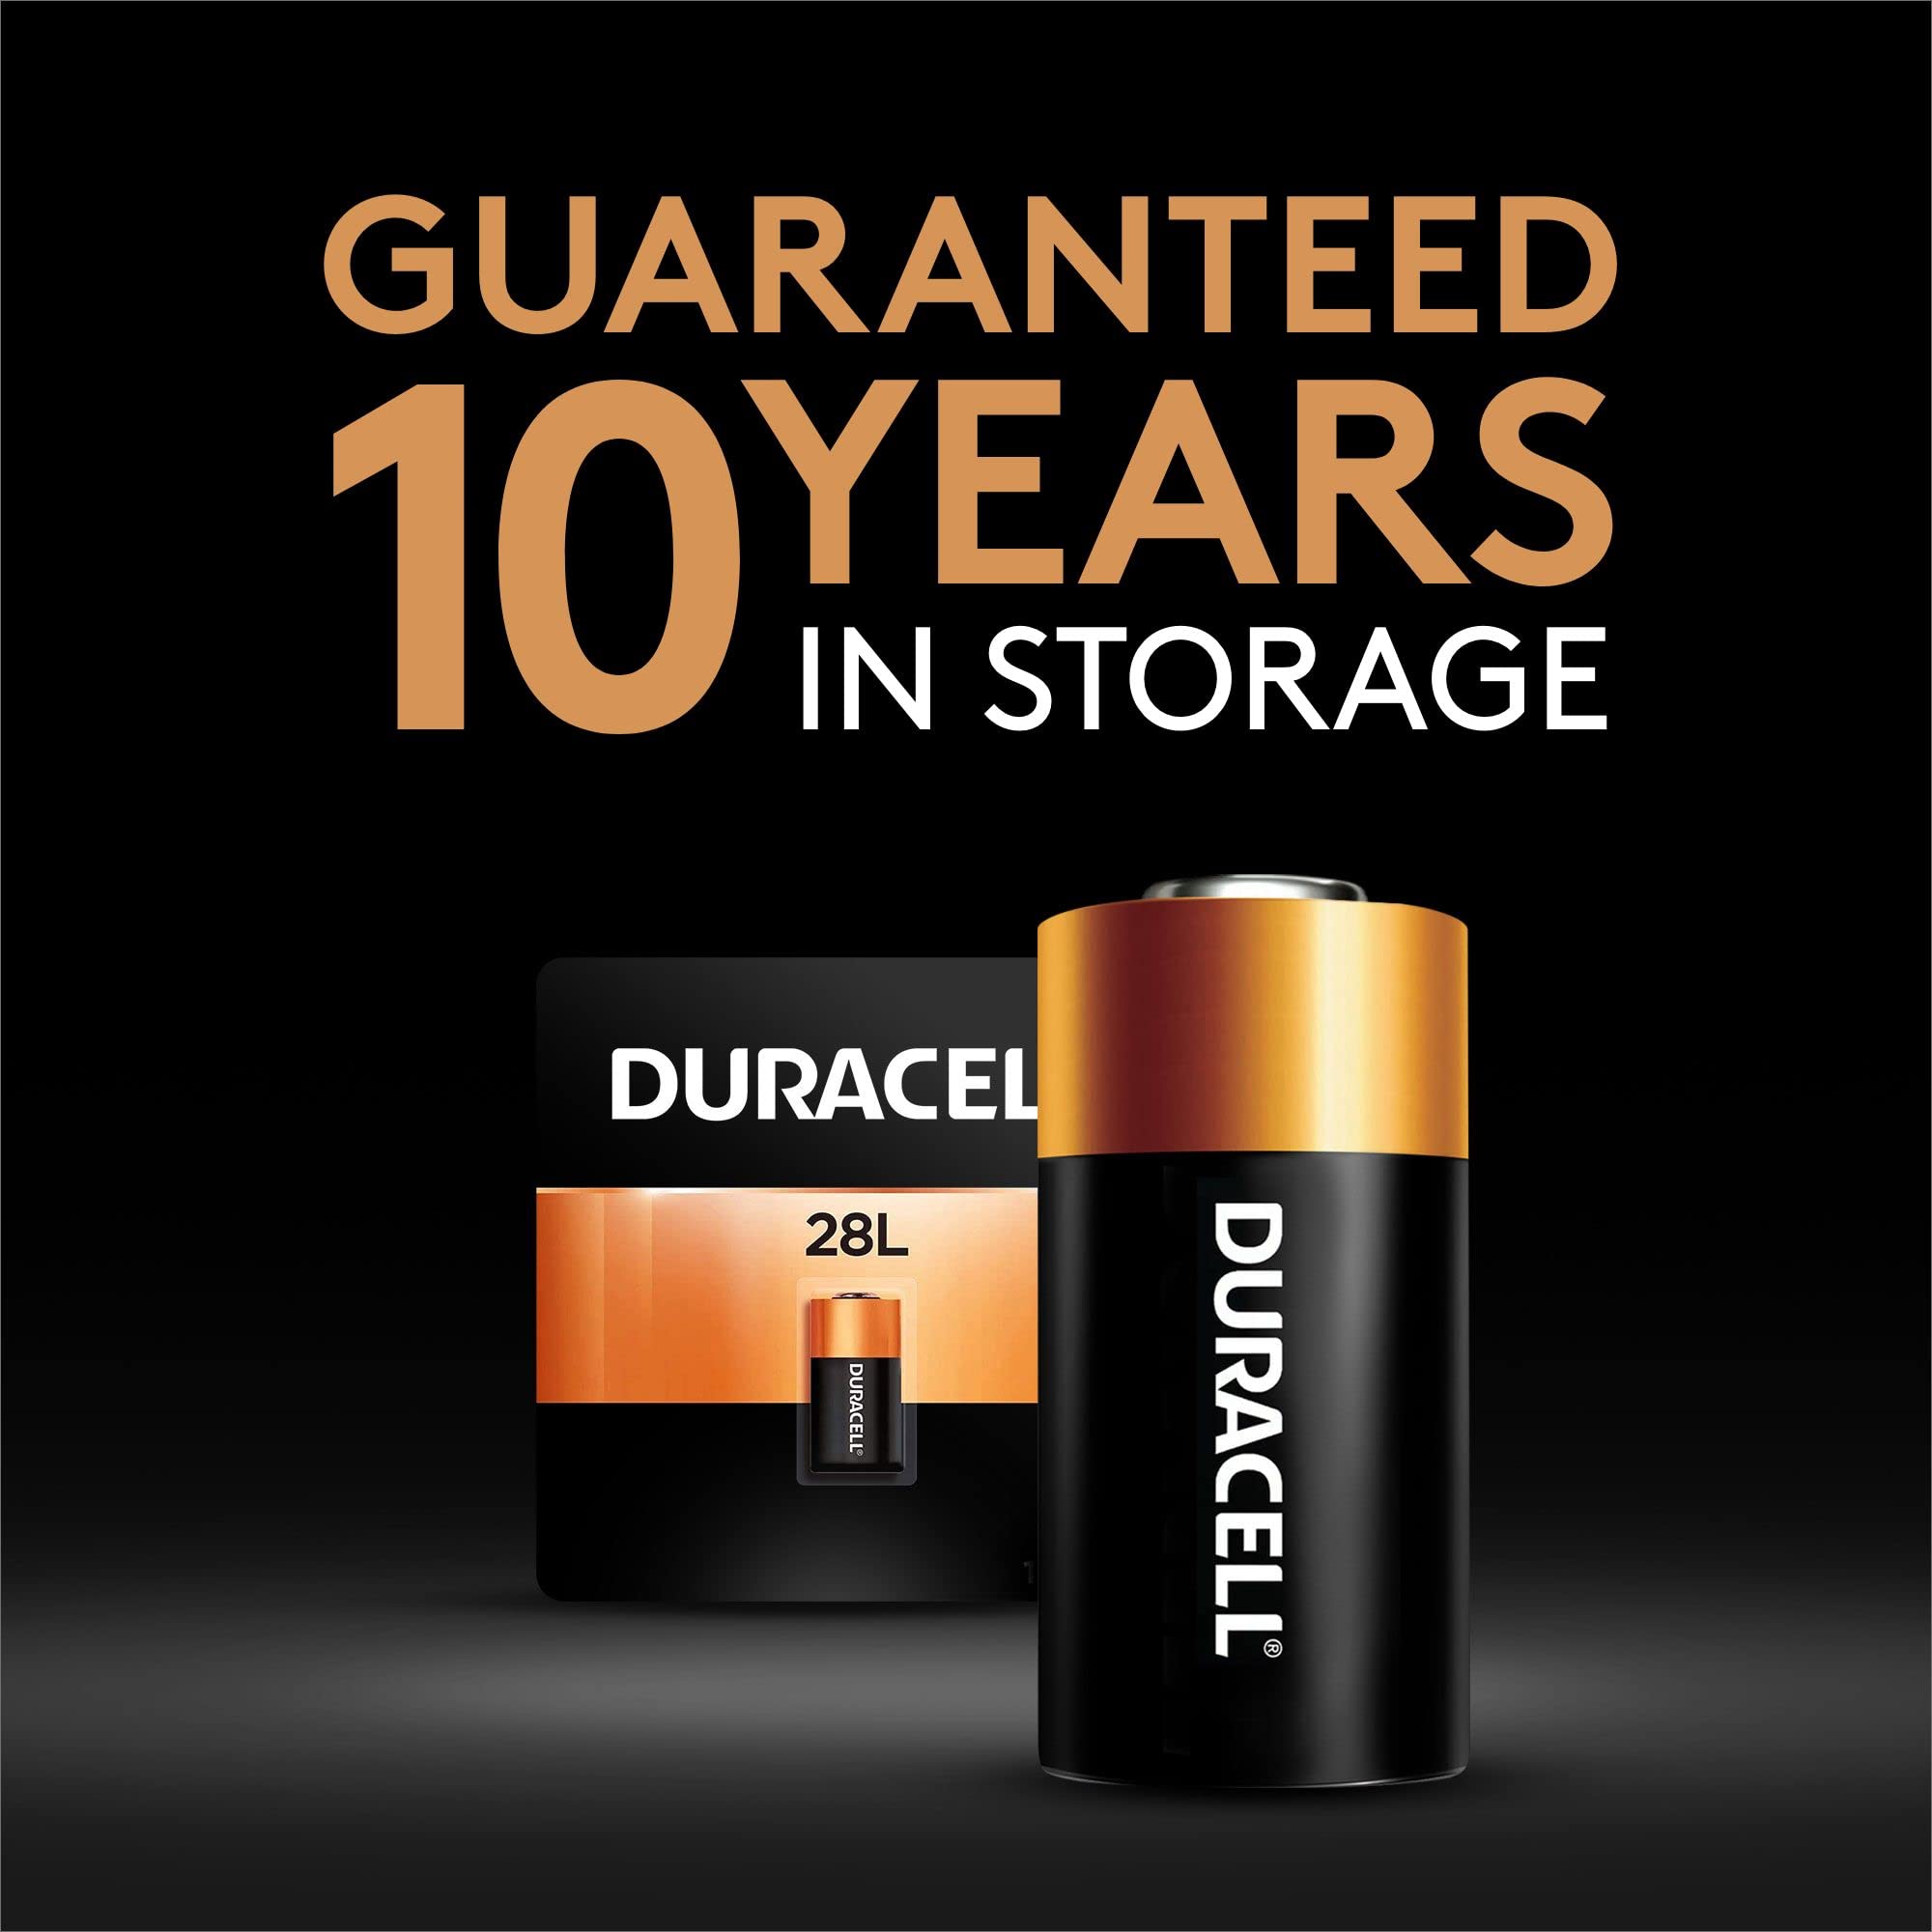 Duracell 28L 6V Lithium Battery, 1 Count Pack, 28L 6 Volt High Power Lithium Battery, Long-Lasting for Video and Photo Cameras, Lighting Equipment, and More